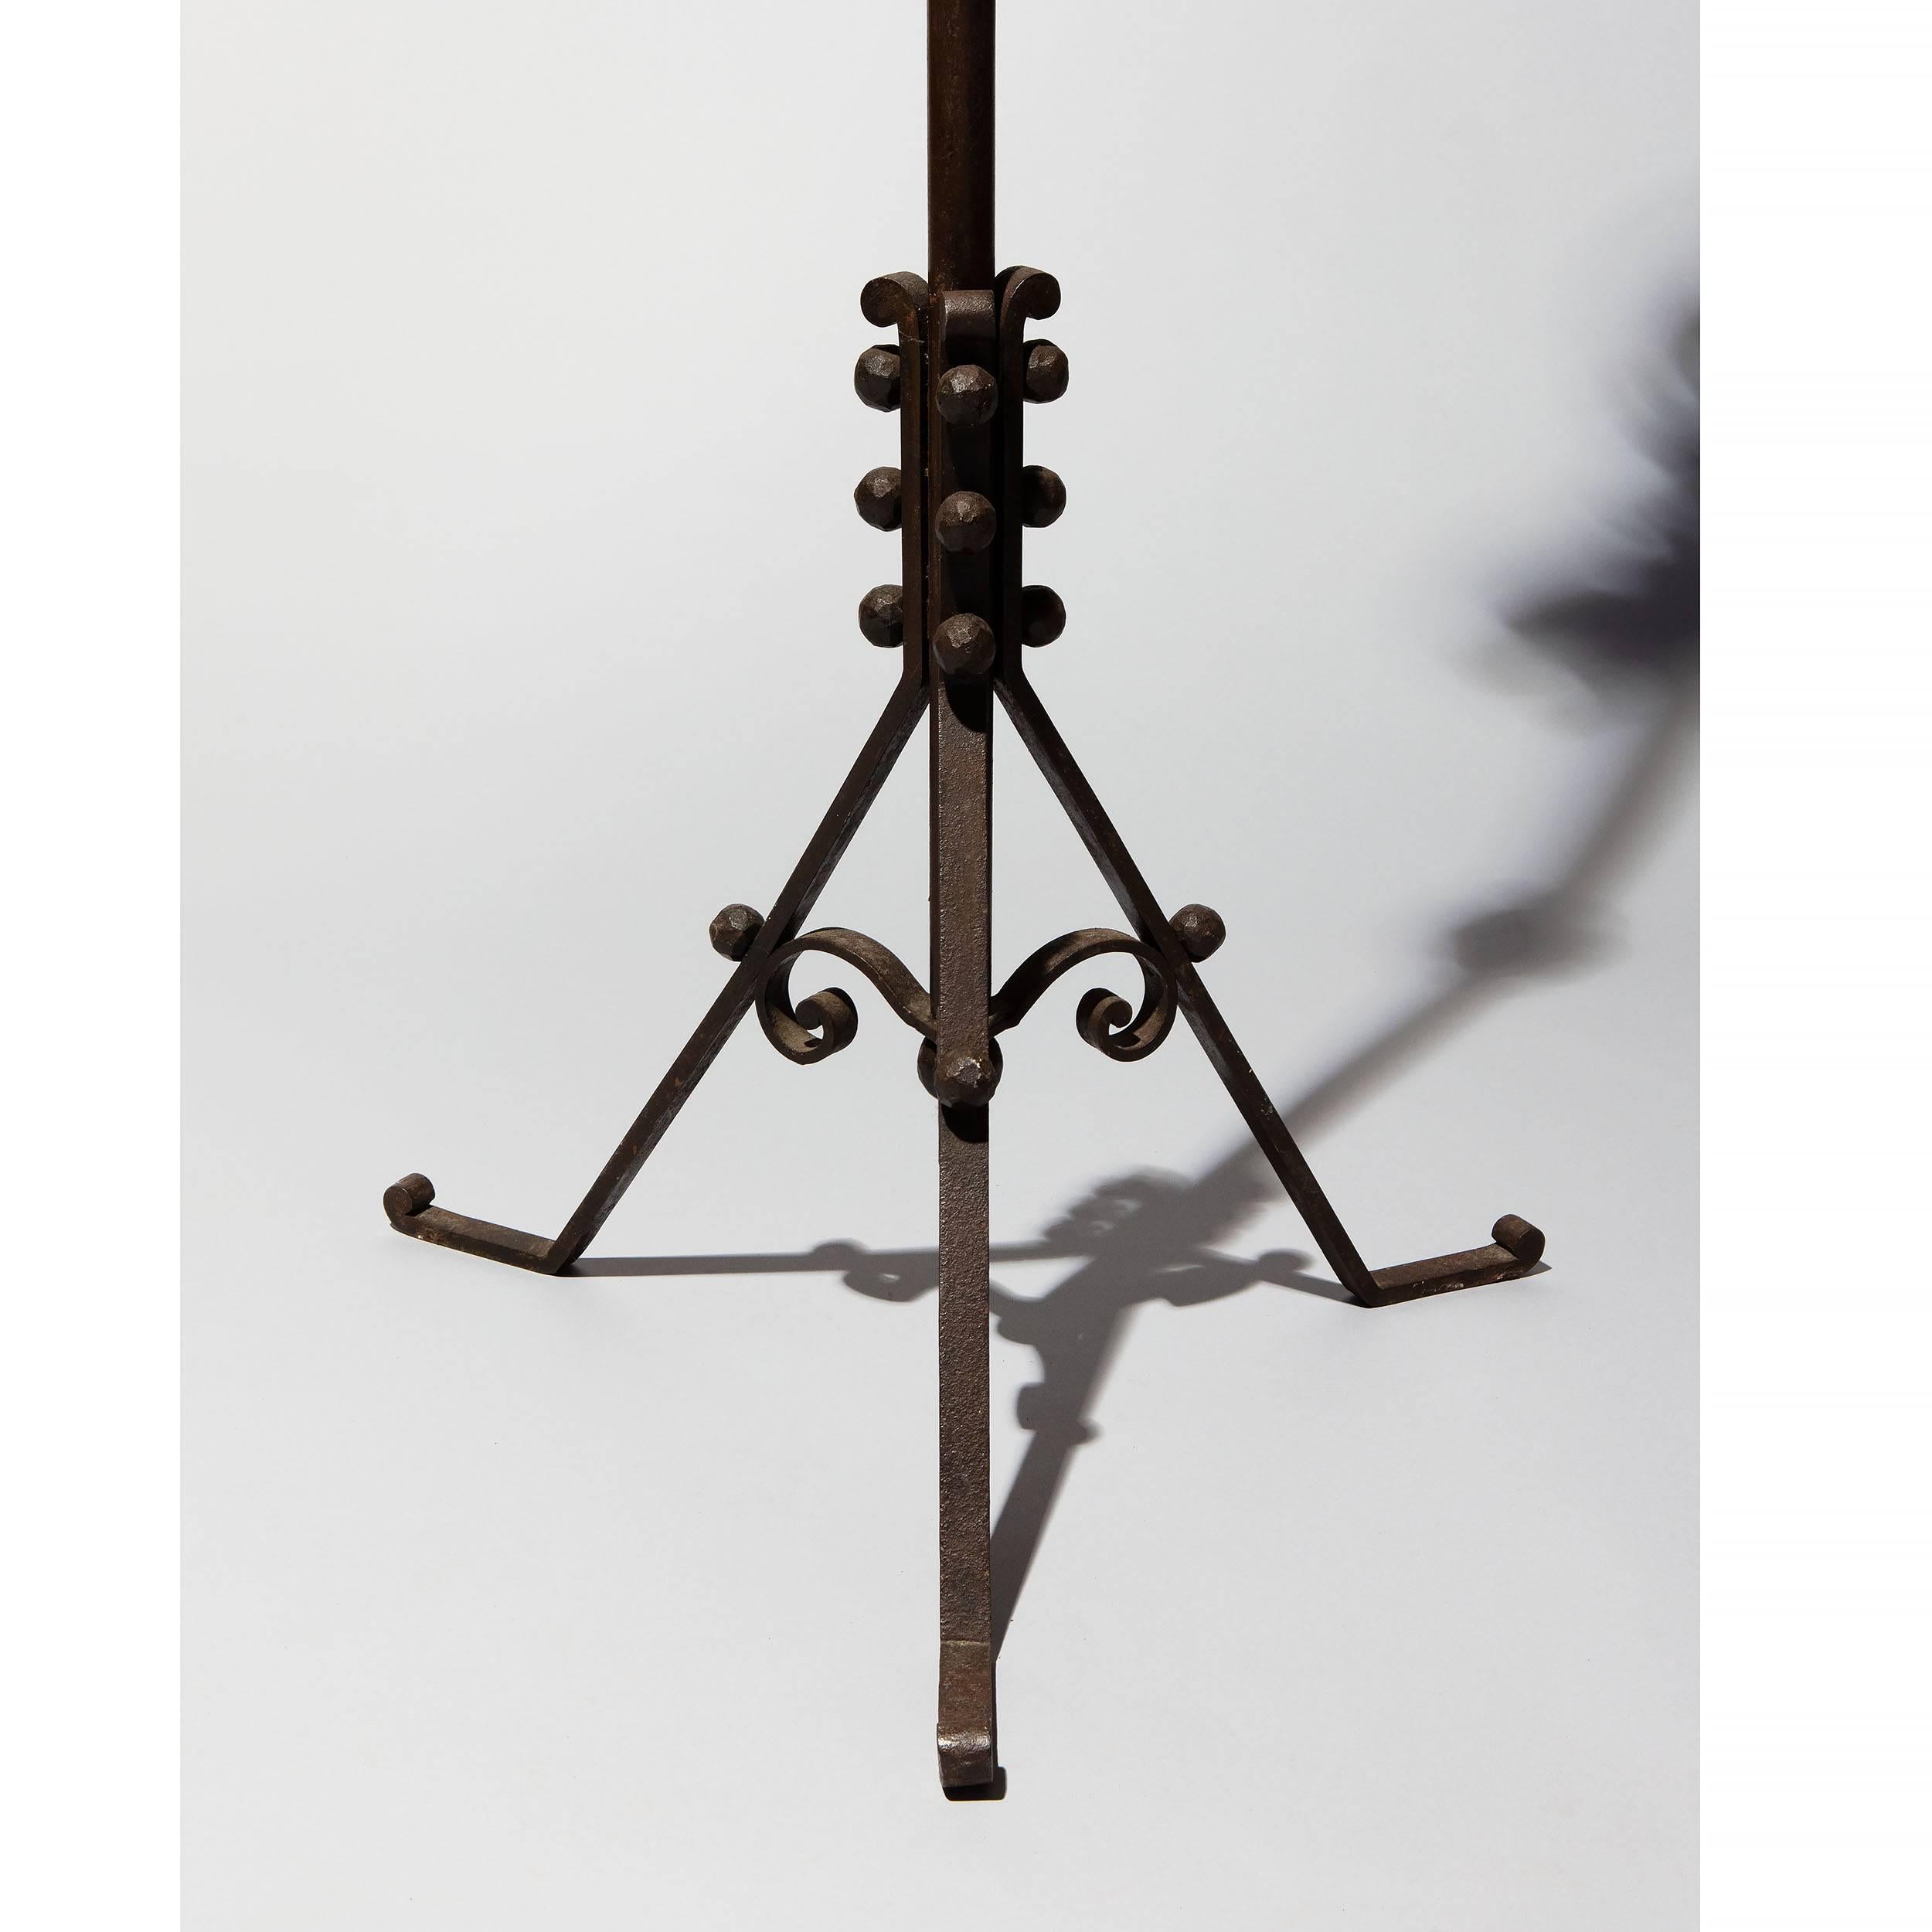 A Mid-Century wrought iron standard lamp with an elaborate scroll arm supported from the vertical upright with Classic Raymond Subes ornamental metal work. The shaft with three central discs of varied circumference and raised on three legs with